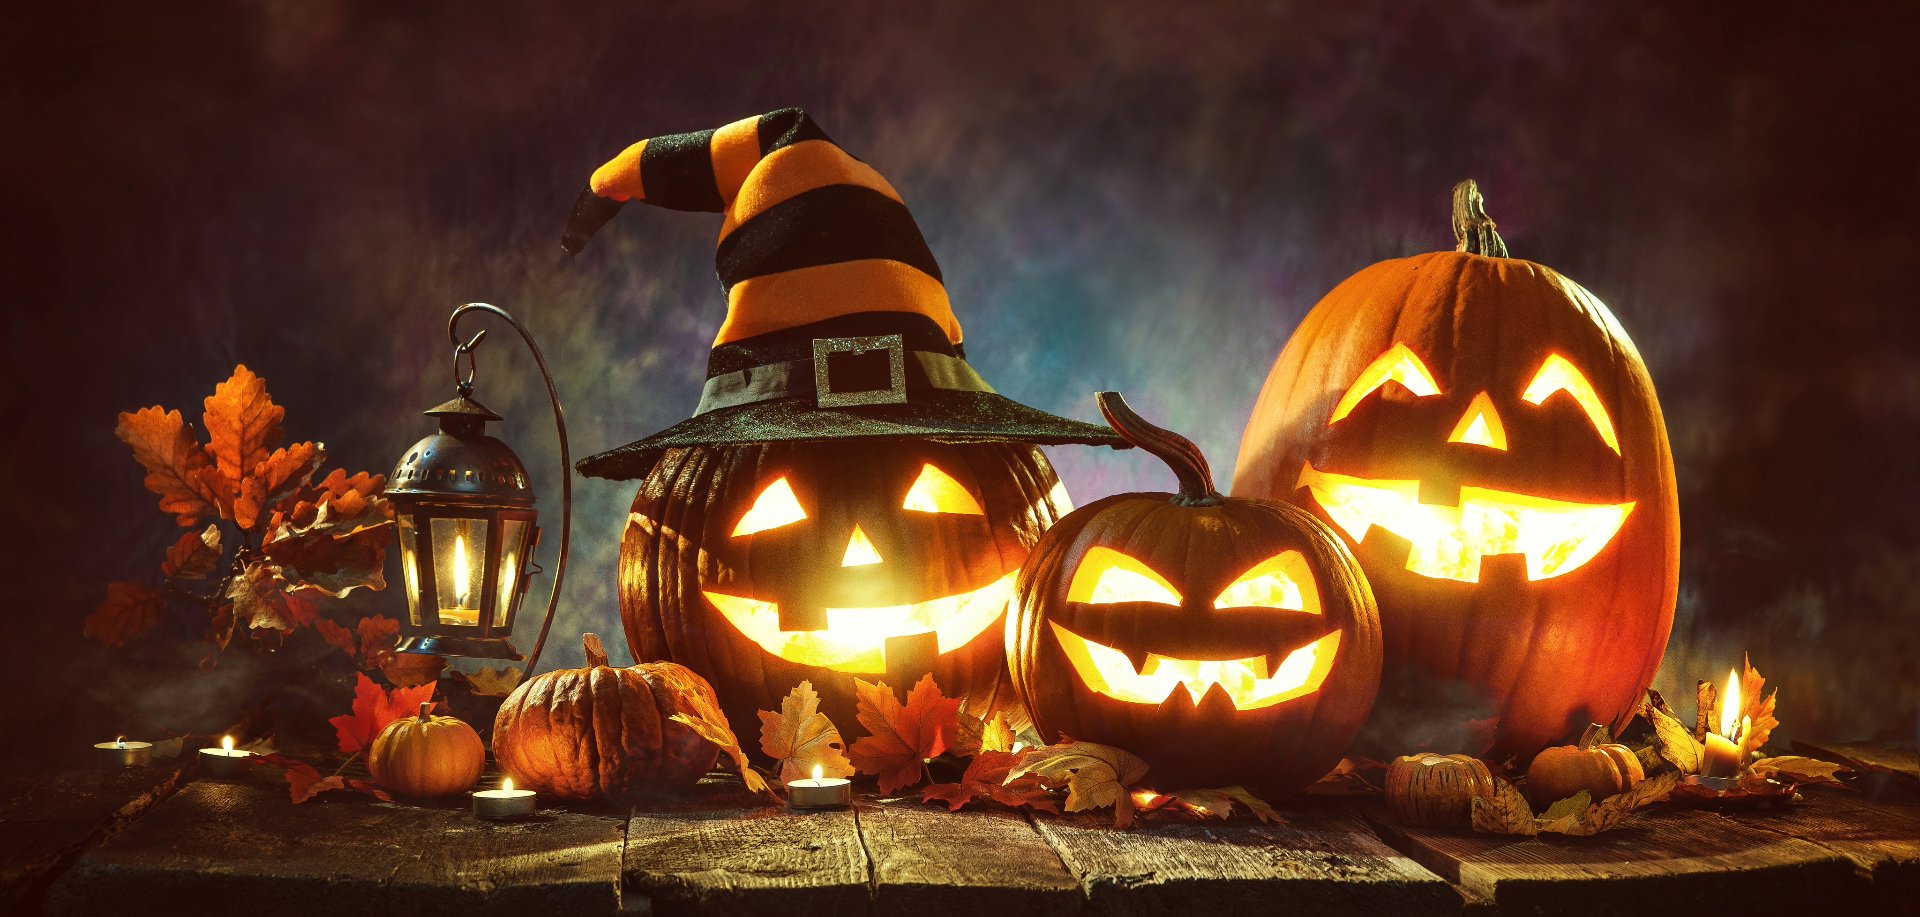 Image of Jack-o-lanterns and other Halloween decorations